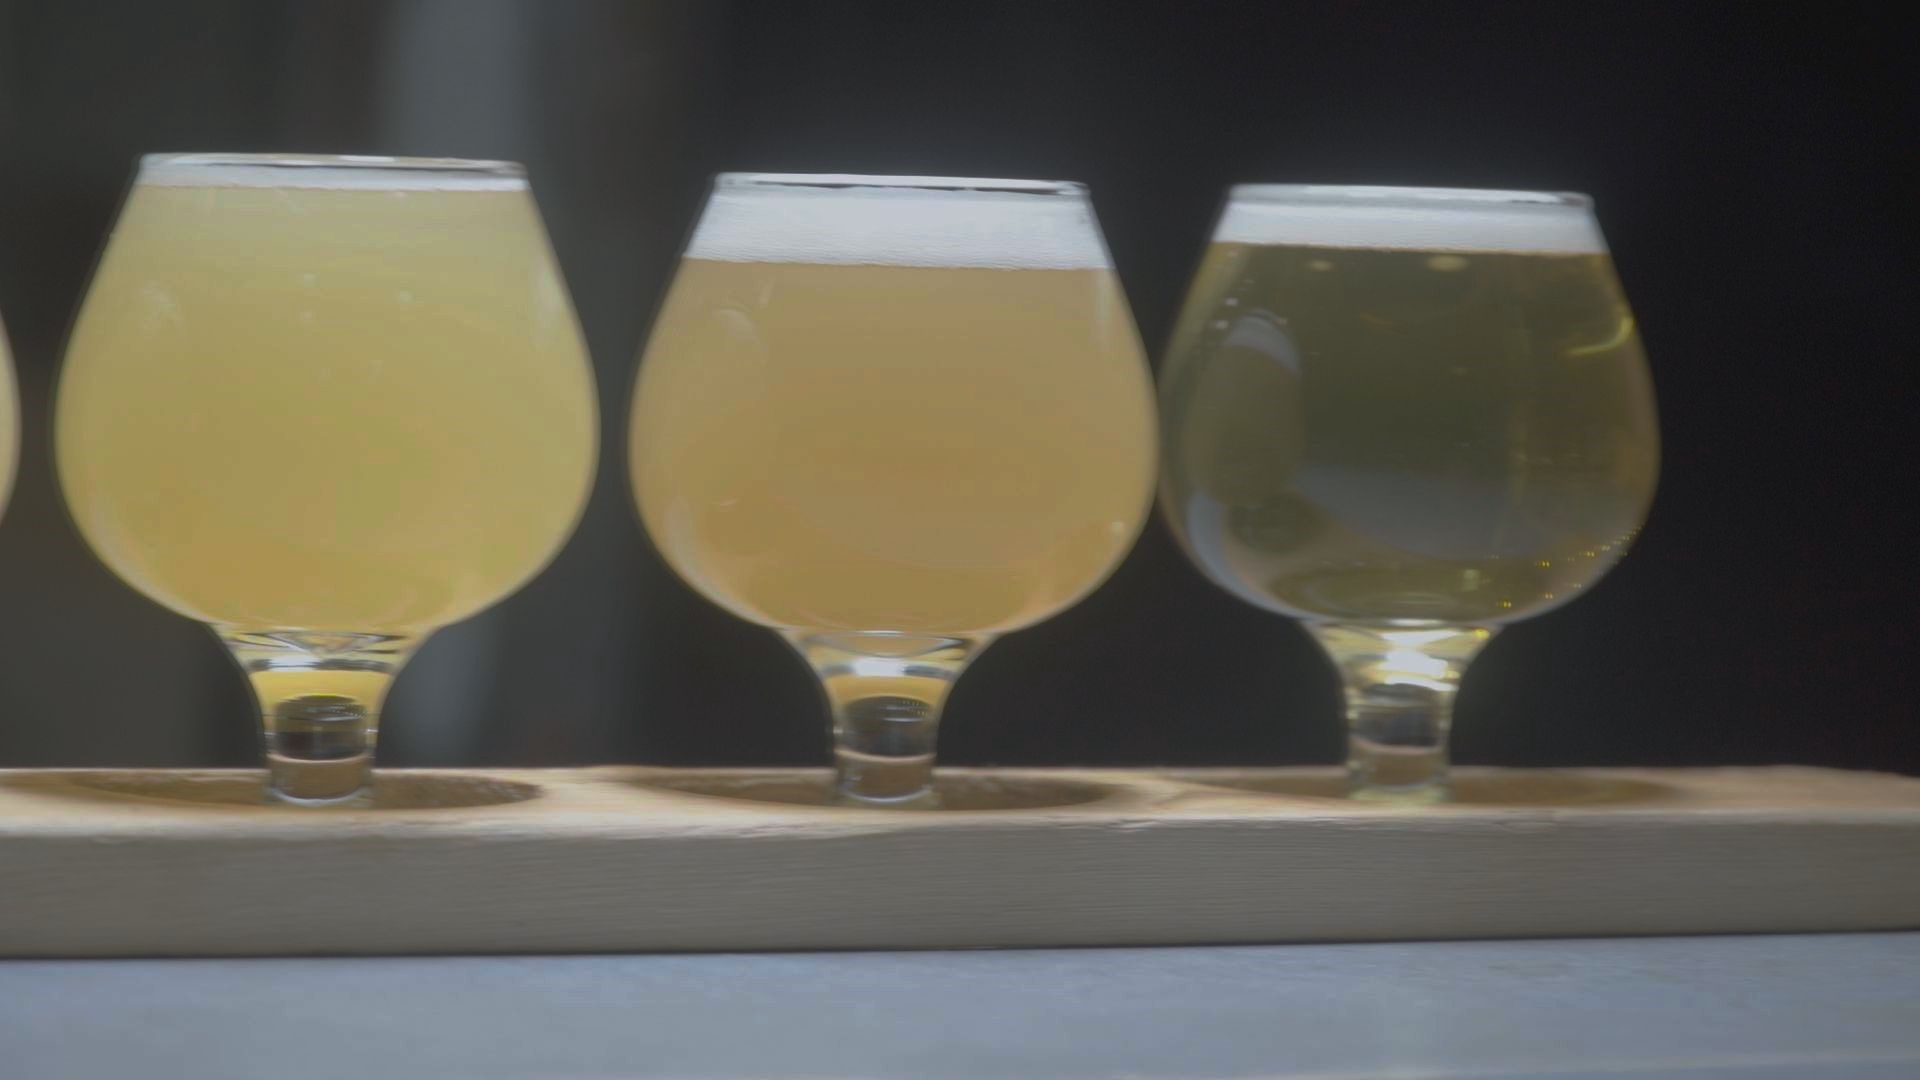 Decades long growth turned into major business. The growing Sacramento craft beer scene employs 1,481 people.